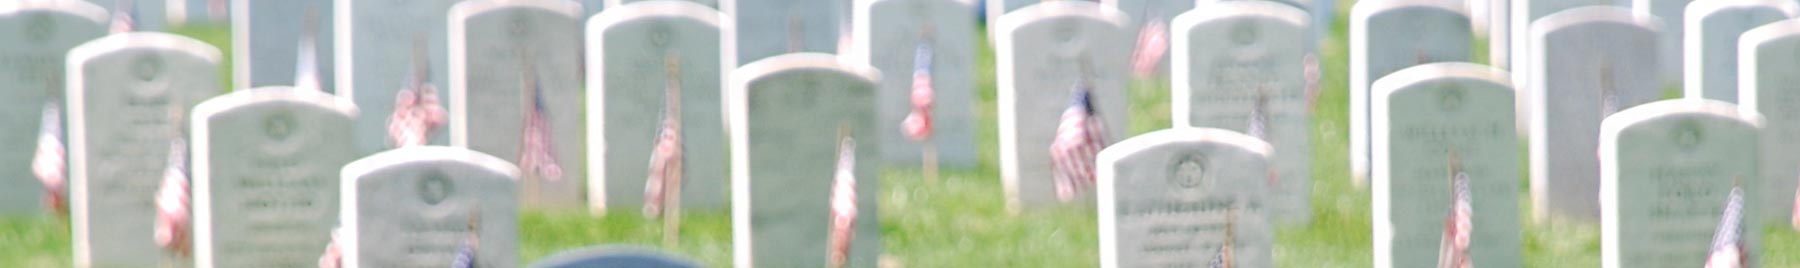 blurred image of gravestones in Arlington National Cemetary